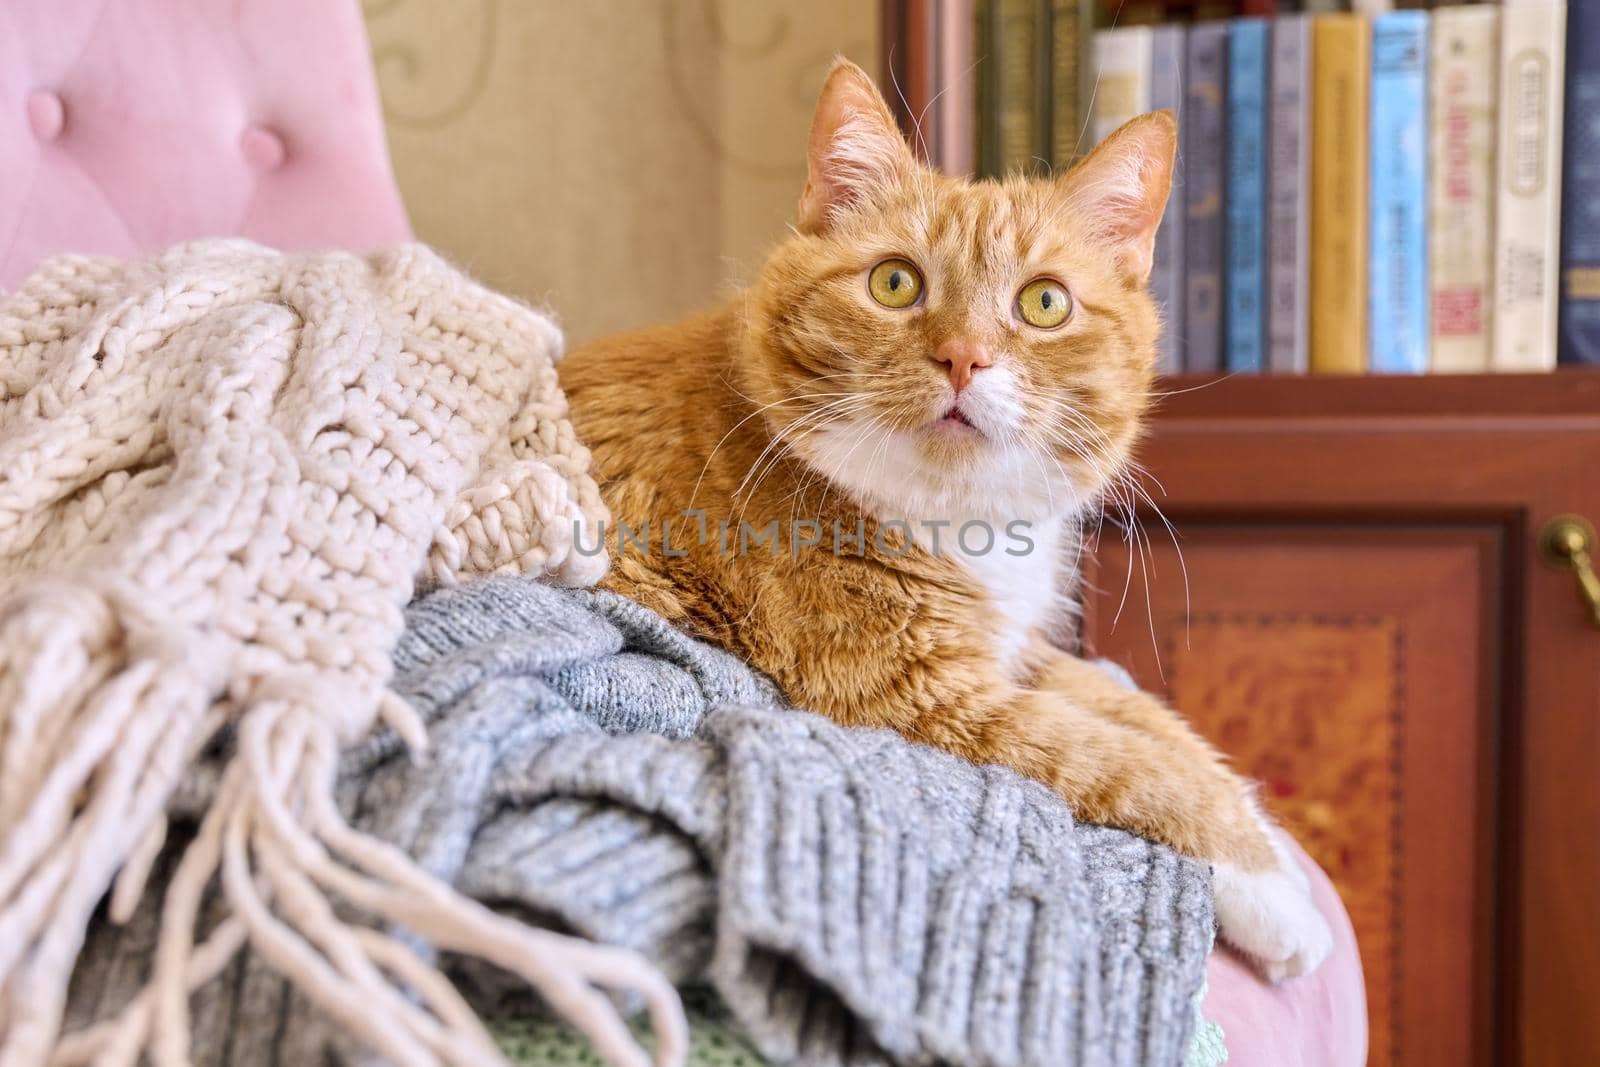 Big ginger cat lying sleeping resting basking on an armchair with winter warm knitted things, cold autumn winter season concept